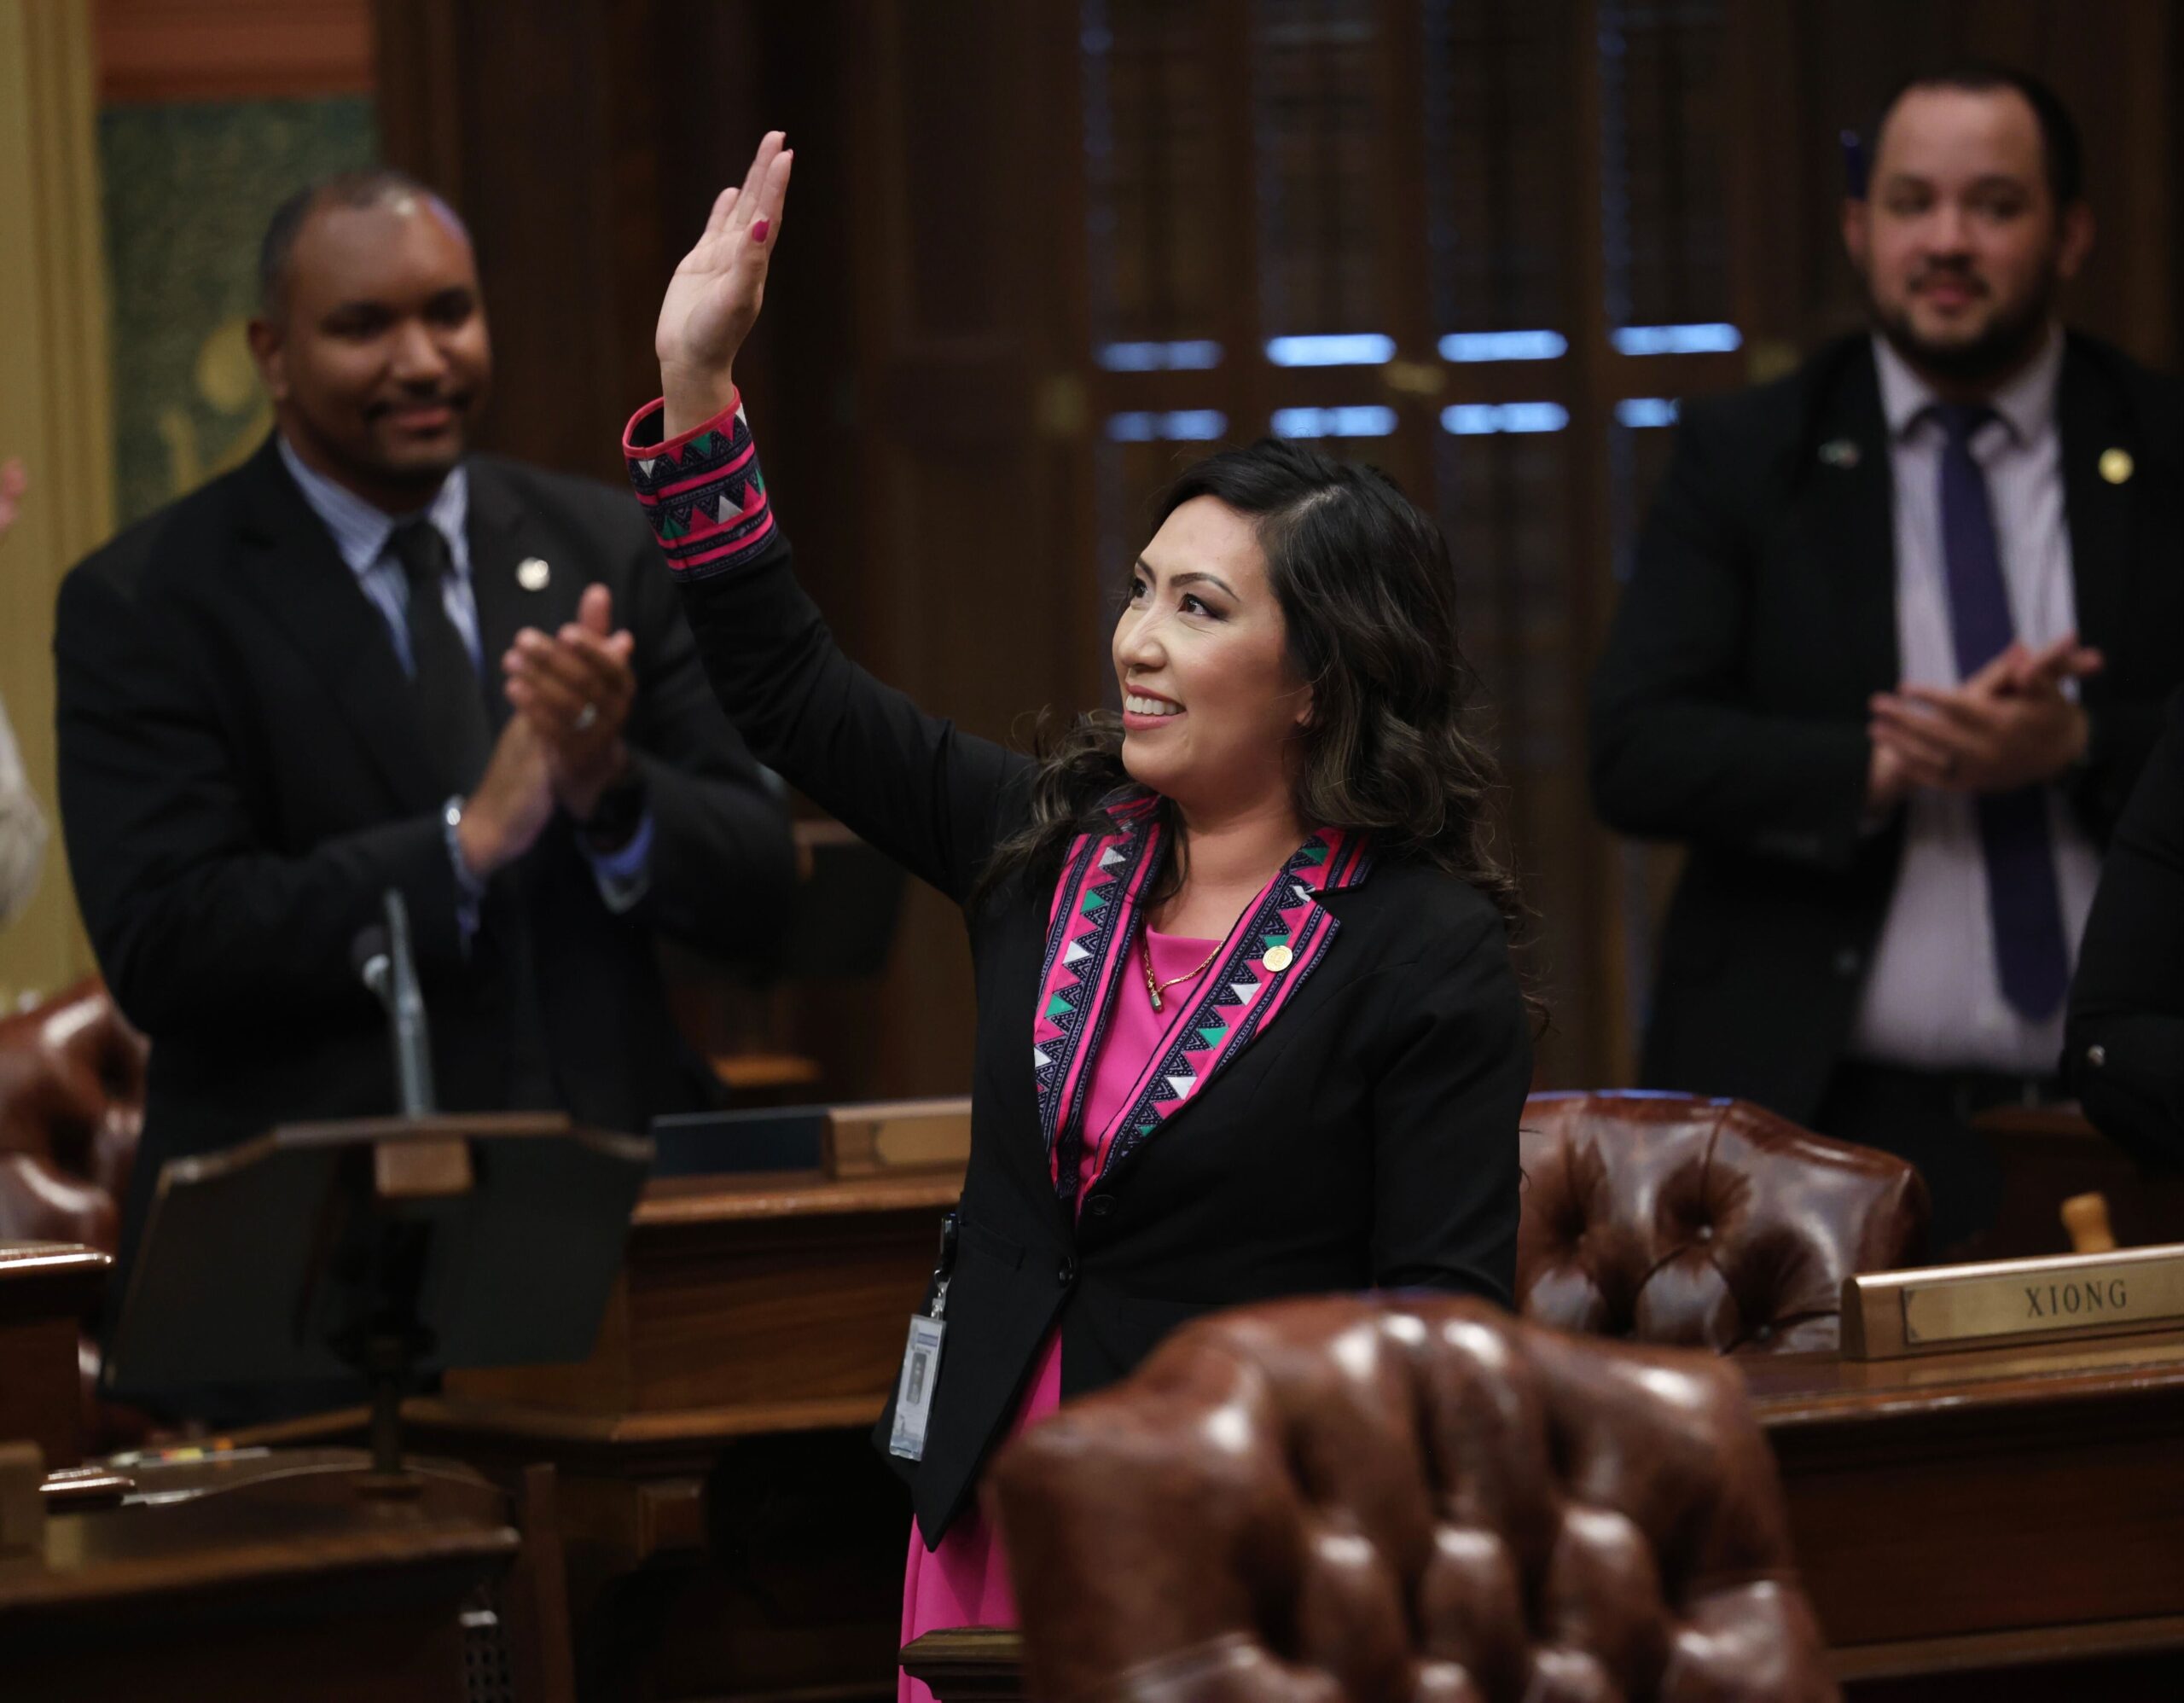 State Representative Mai Xiong waves to the gallery after delivering a speech as her colleagues applaud in the background.